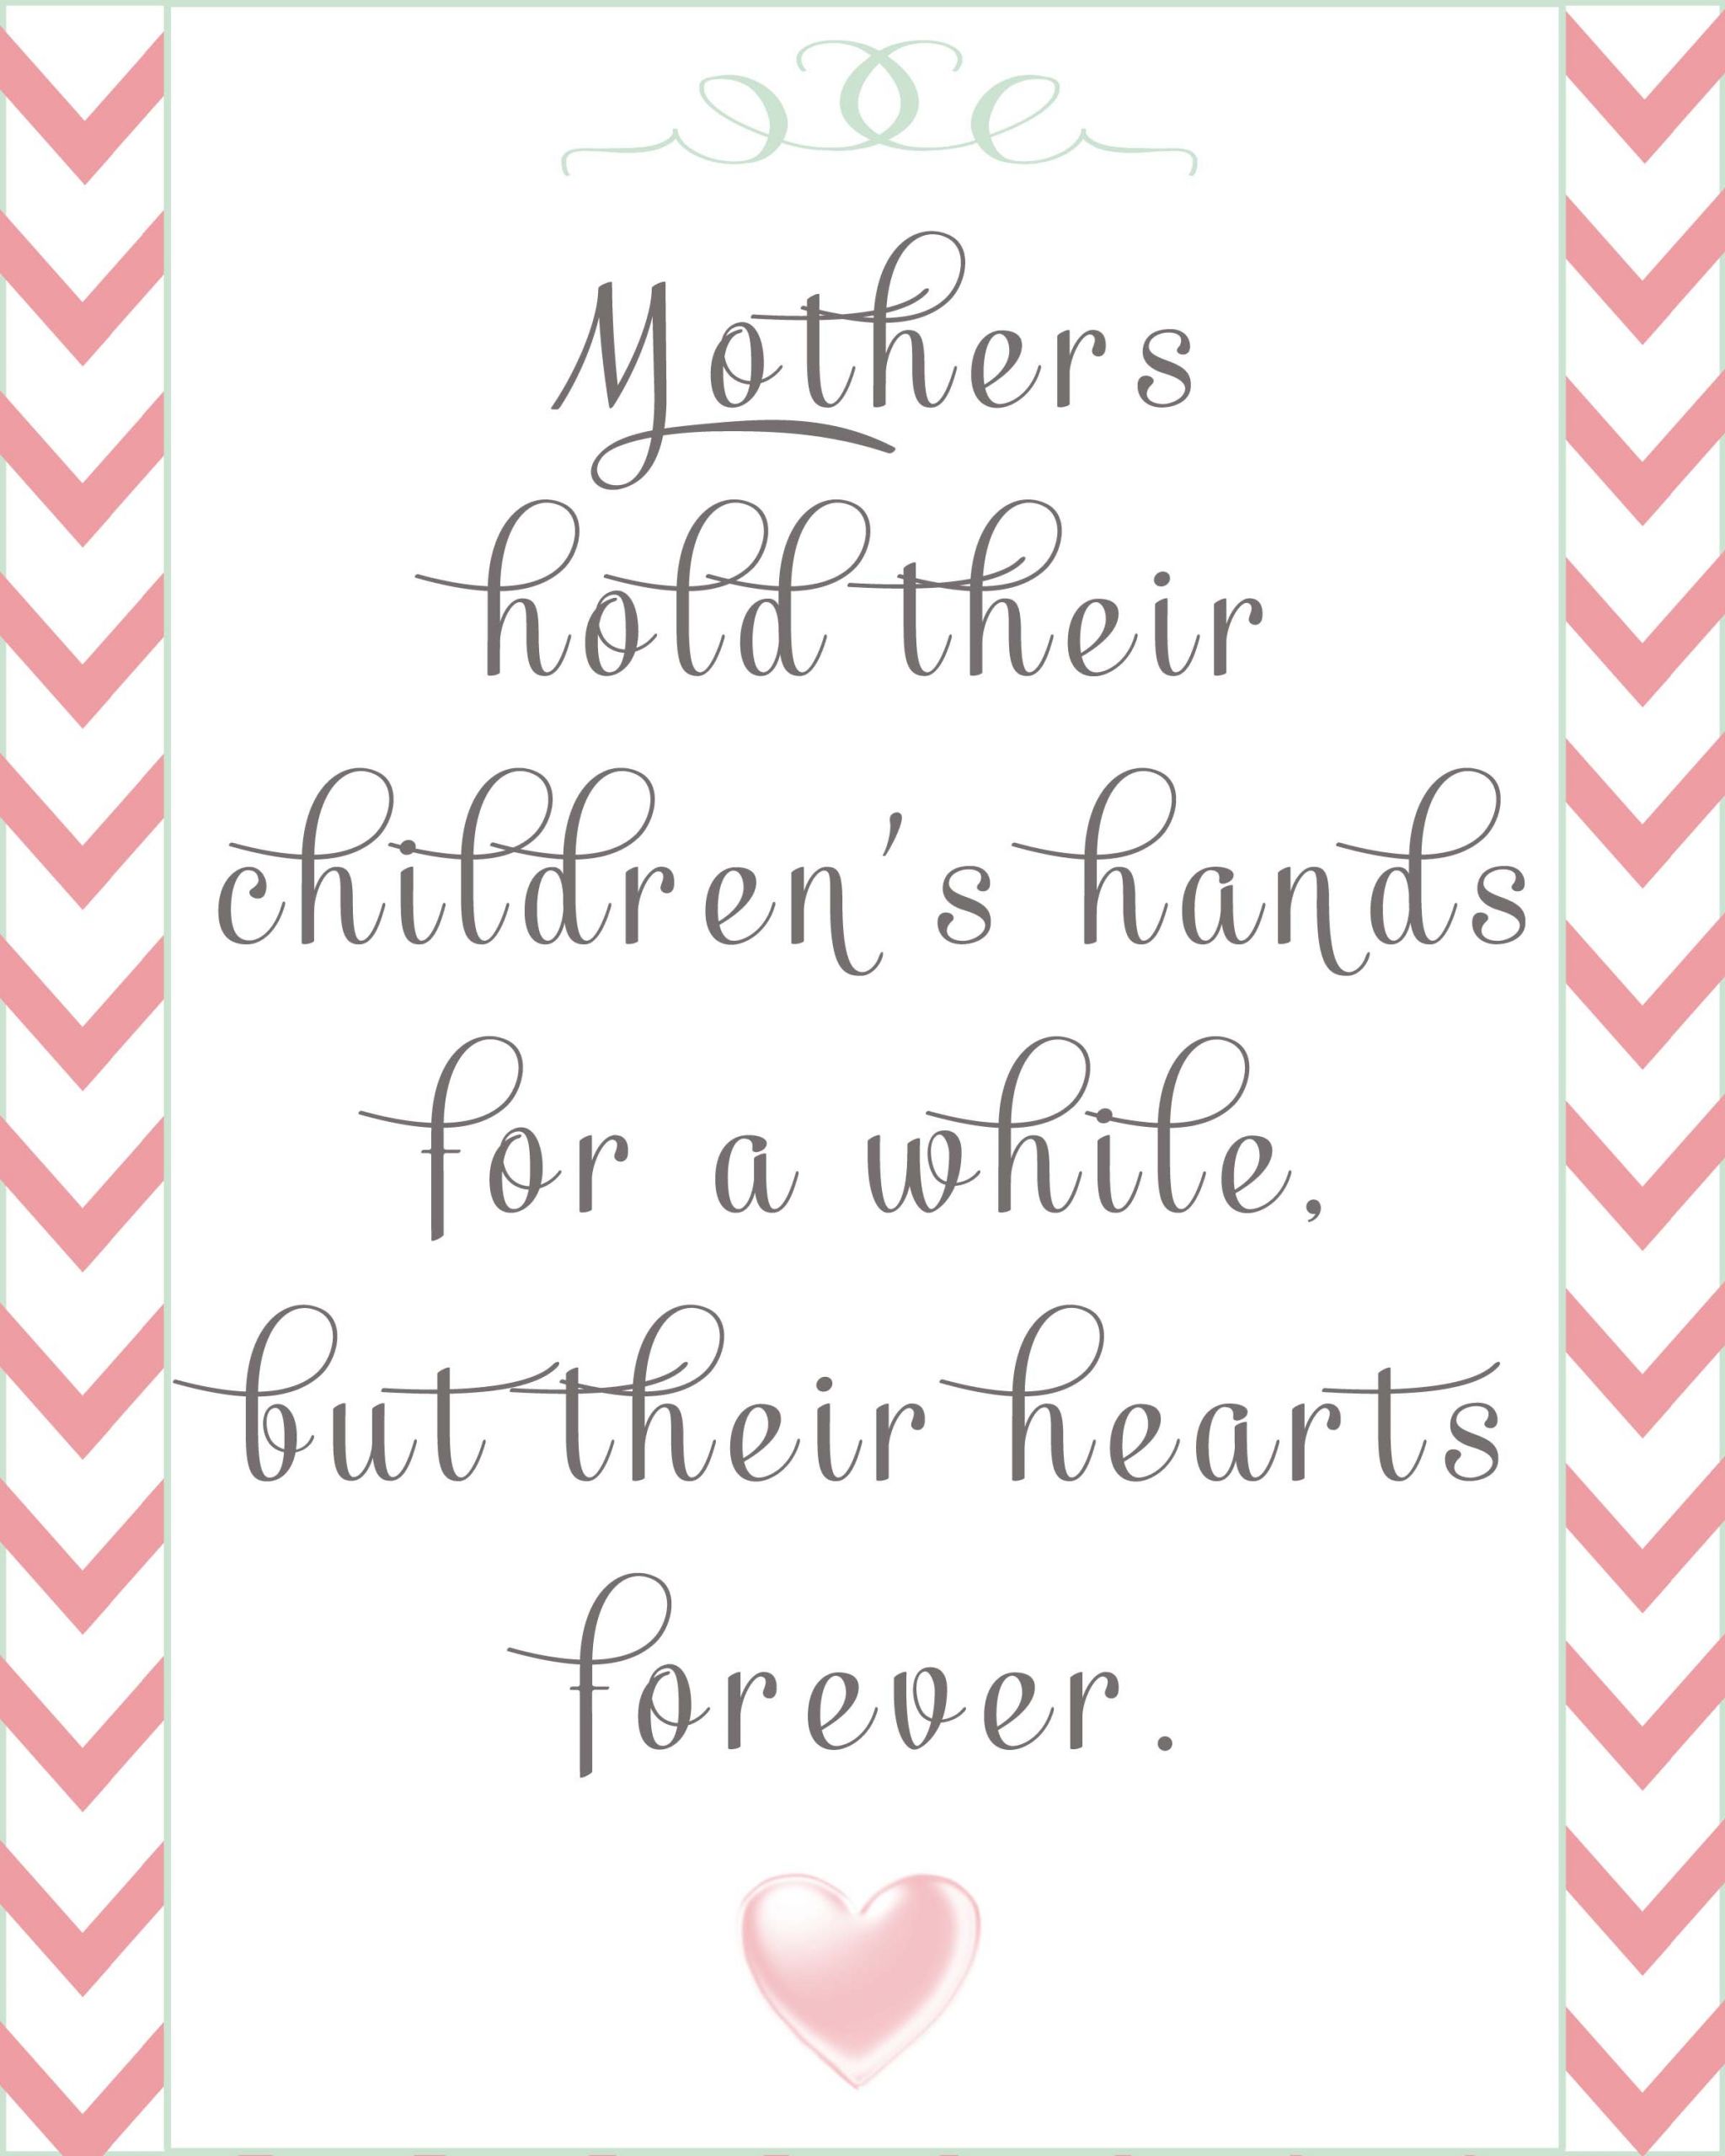 Quotes About Mothers
 35 Adorable Quotes About Mothers – The WoW Style